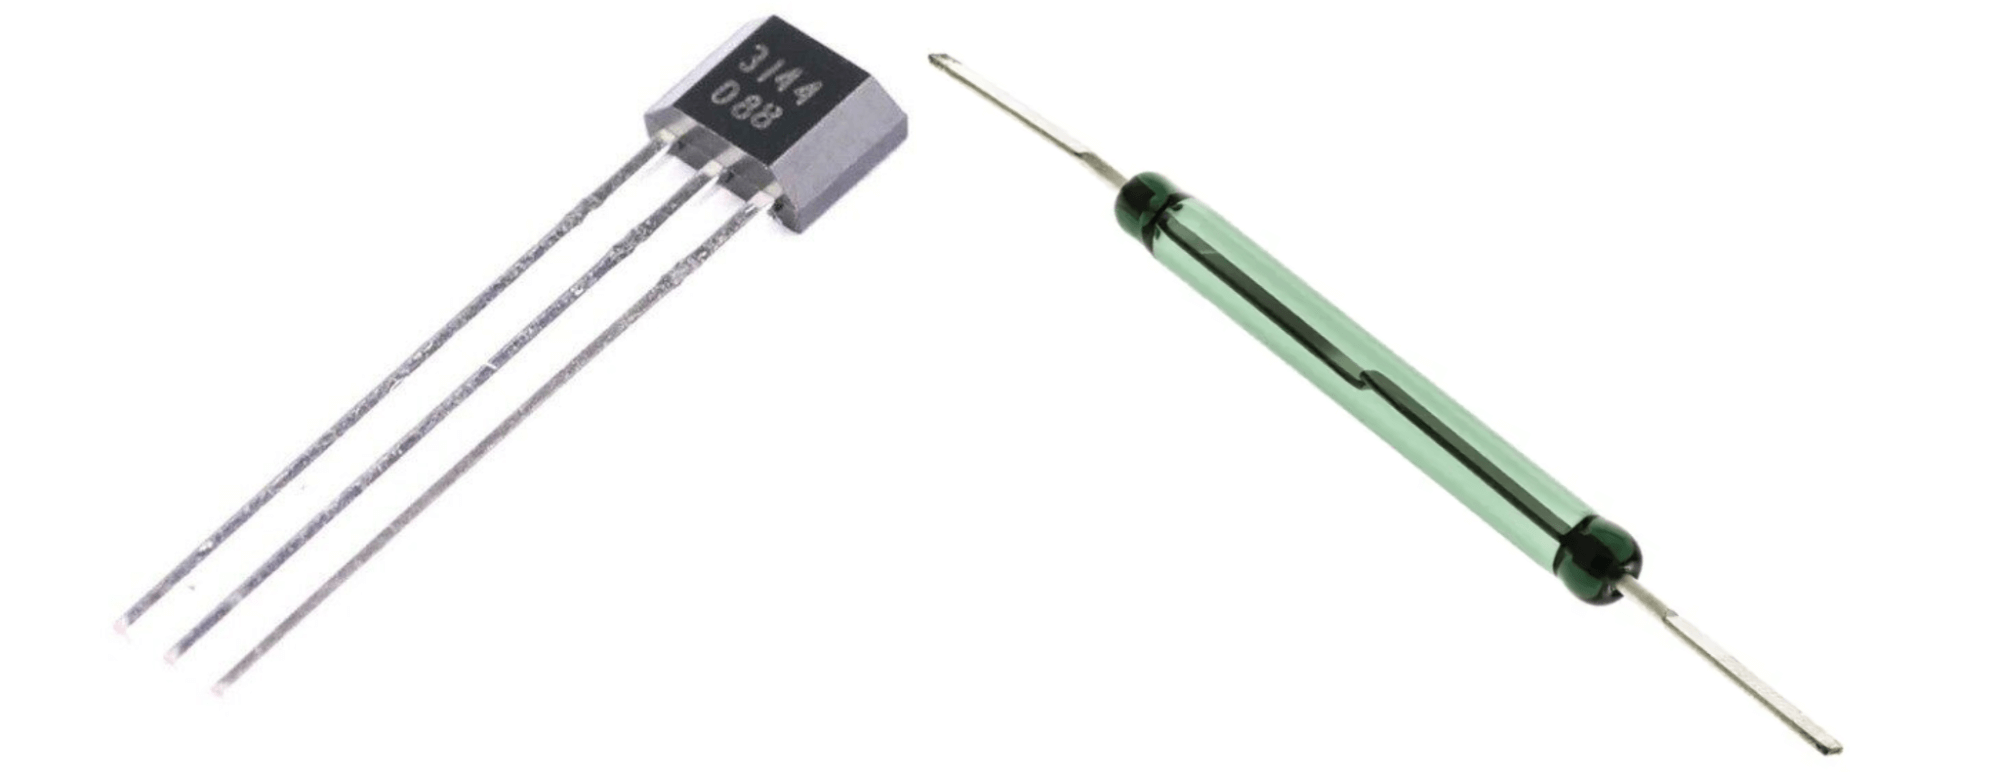  Comparison Of Reed Switch With Hall Effect Sensors